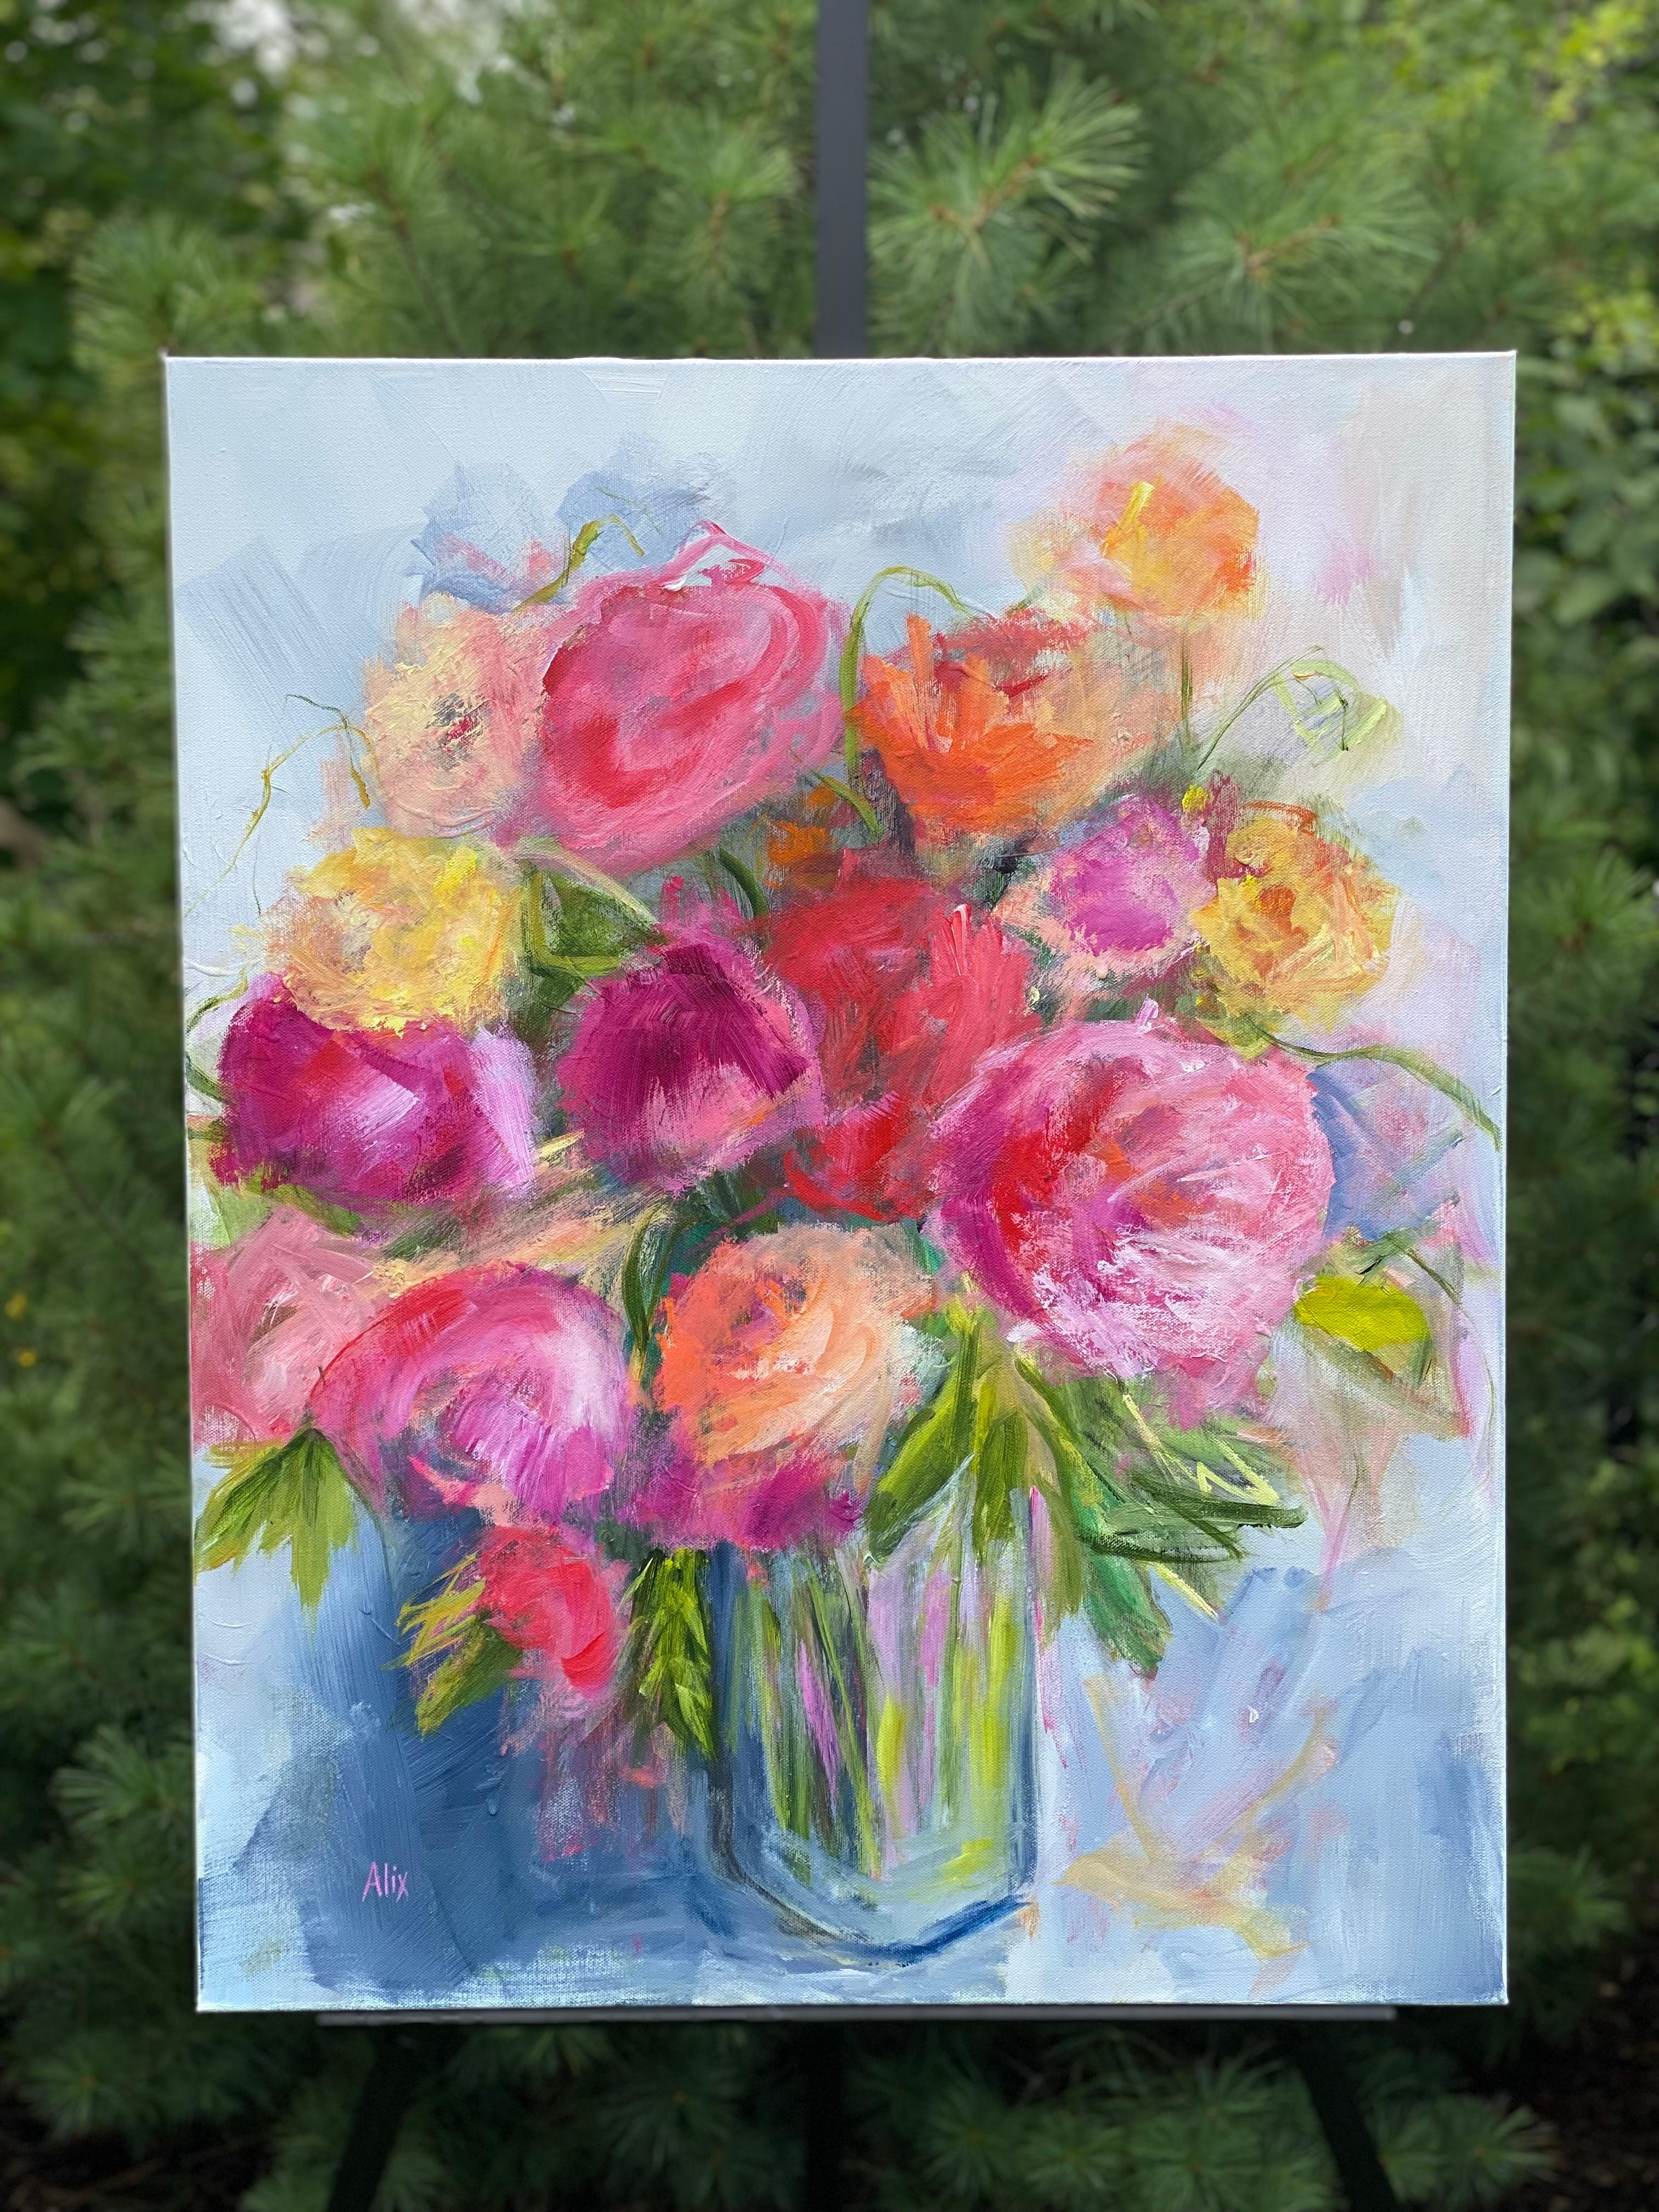 <p>Artist Comments<br>Artist Alix Palo presents an alluring still life of ranunculus flowers in a glass vase. The painting exudes vitality, blooming in coral, red, and yellow hues. Through the expressive brushwork, the composition comes alive,